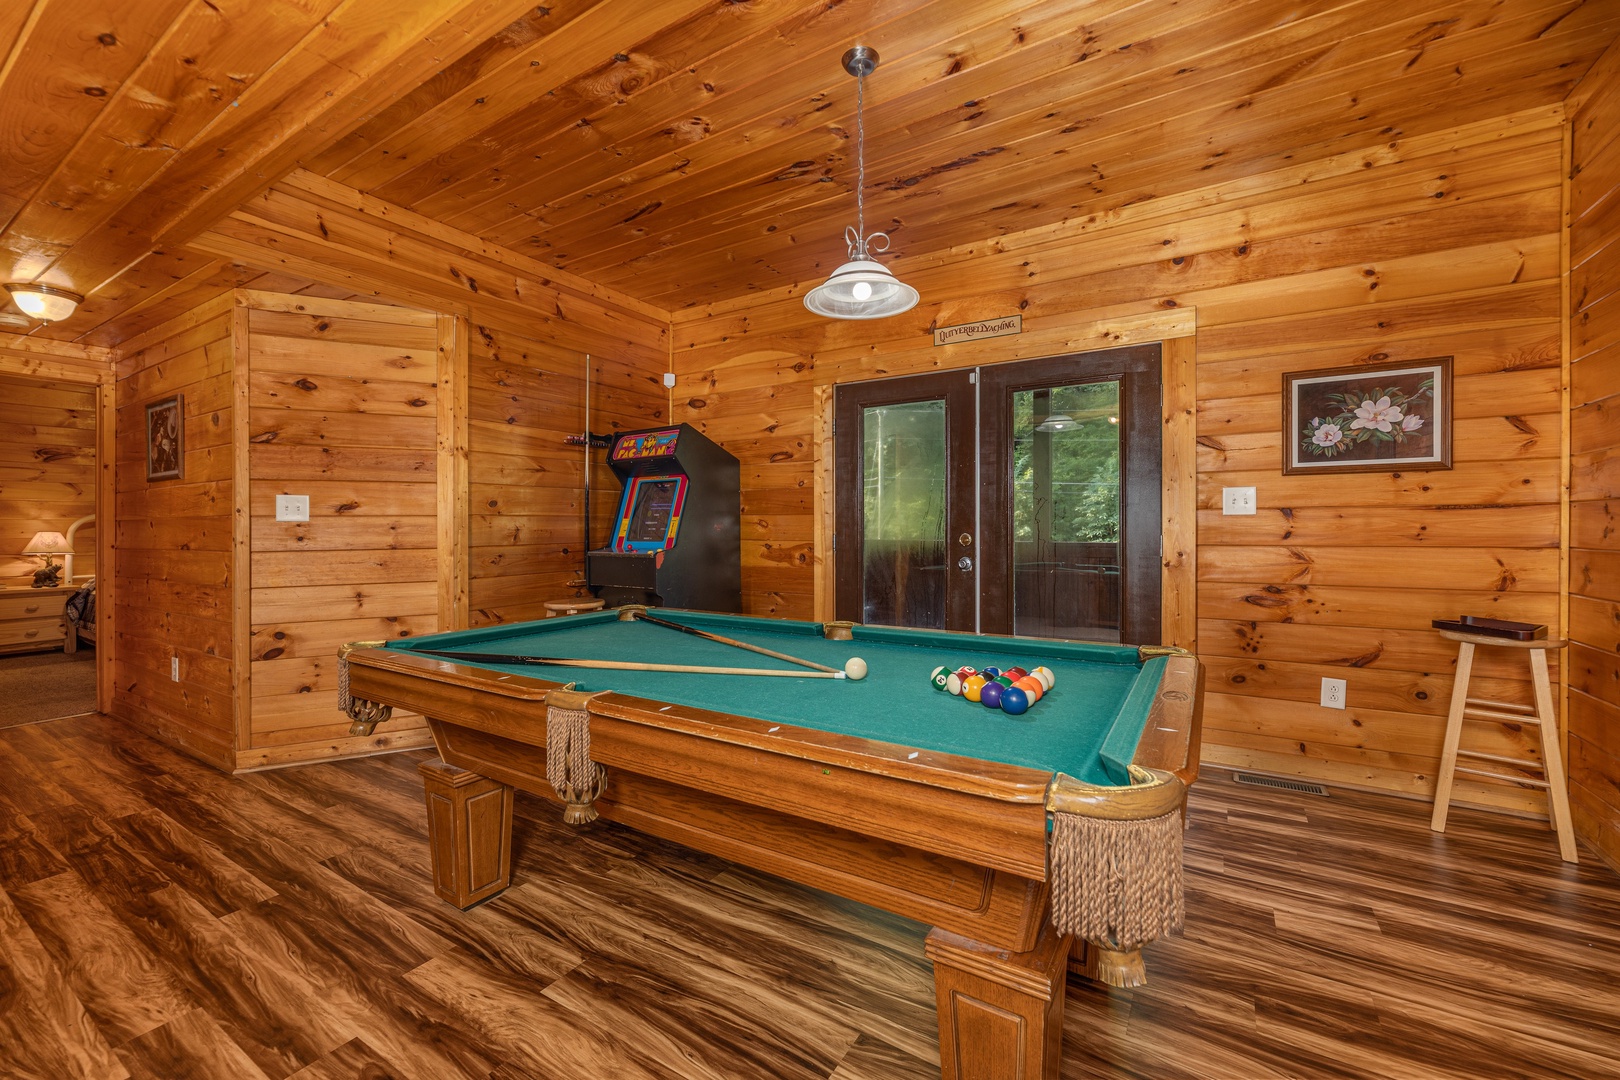 Pool table and arcade game at Family Getaway, a 4 bedroom cabin rental located in Pigeon Forge